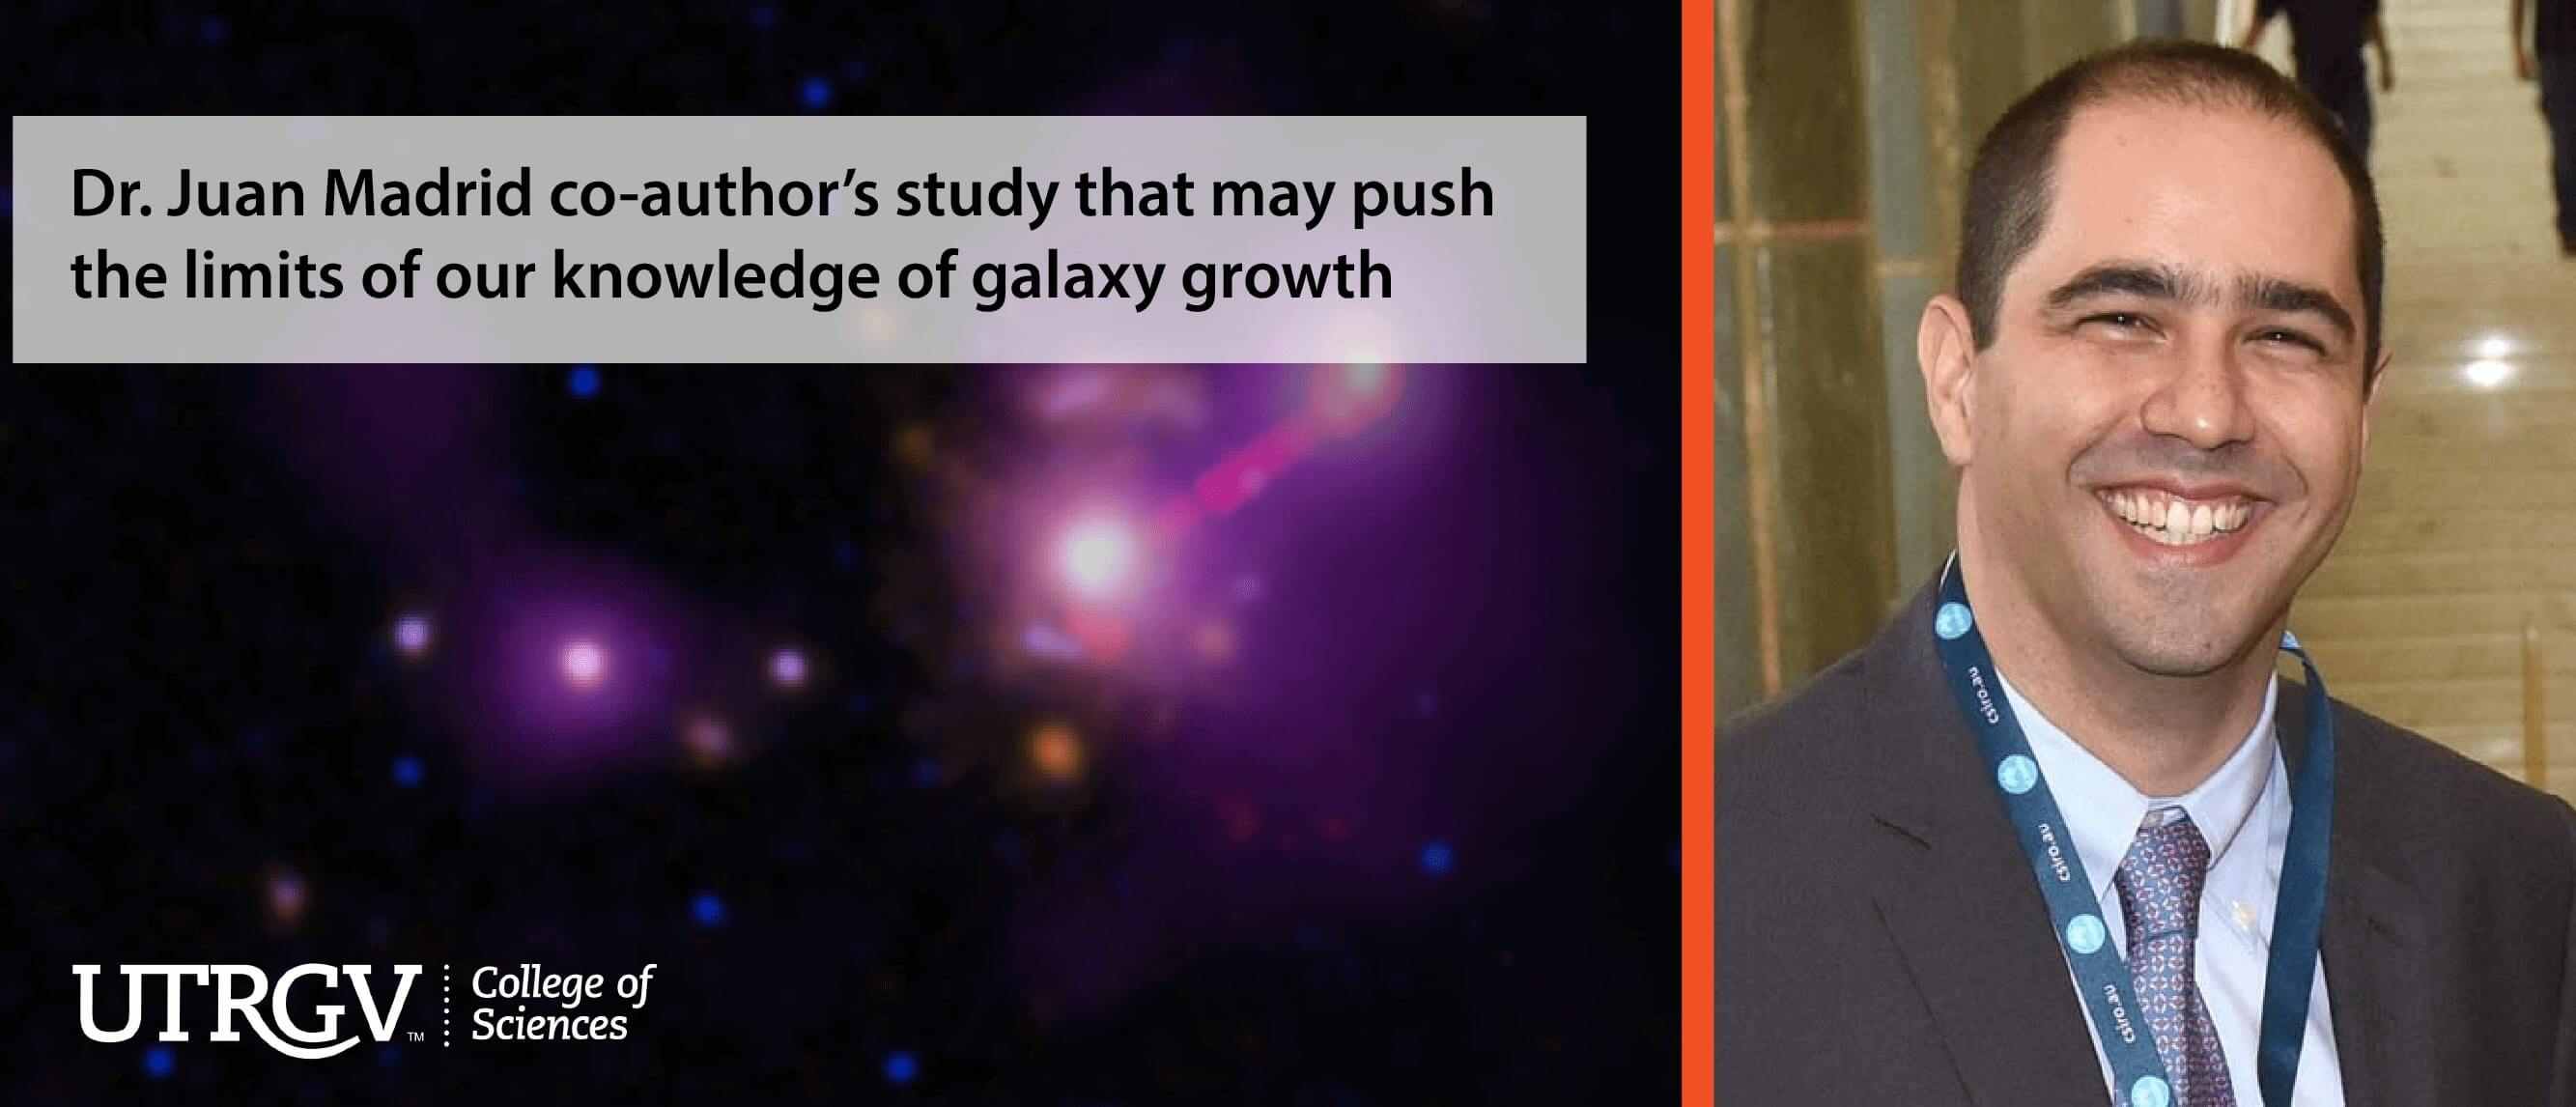 Dr. Juan Madrid co-author’s study that may push the limits of our knowledge of galaxy growth